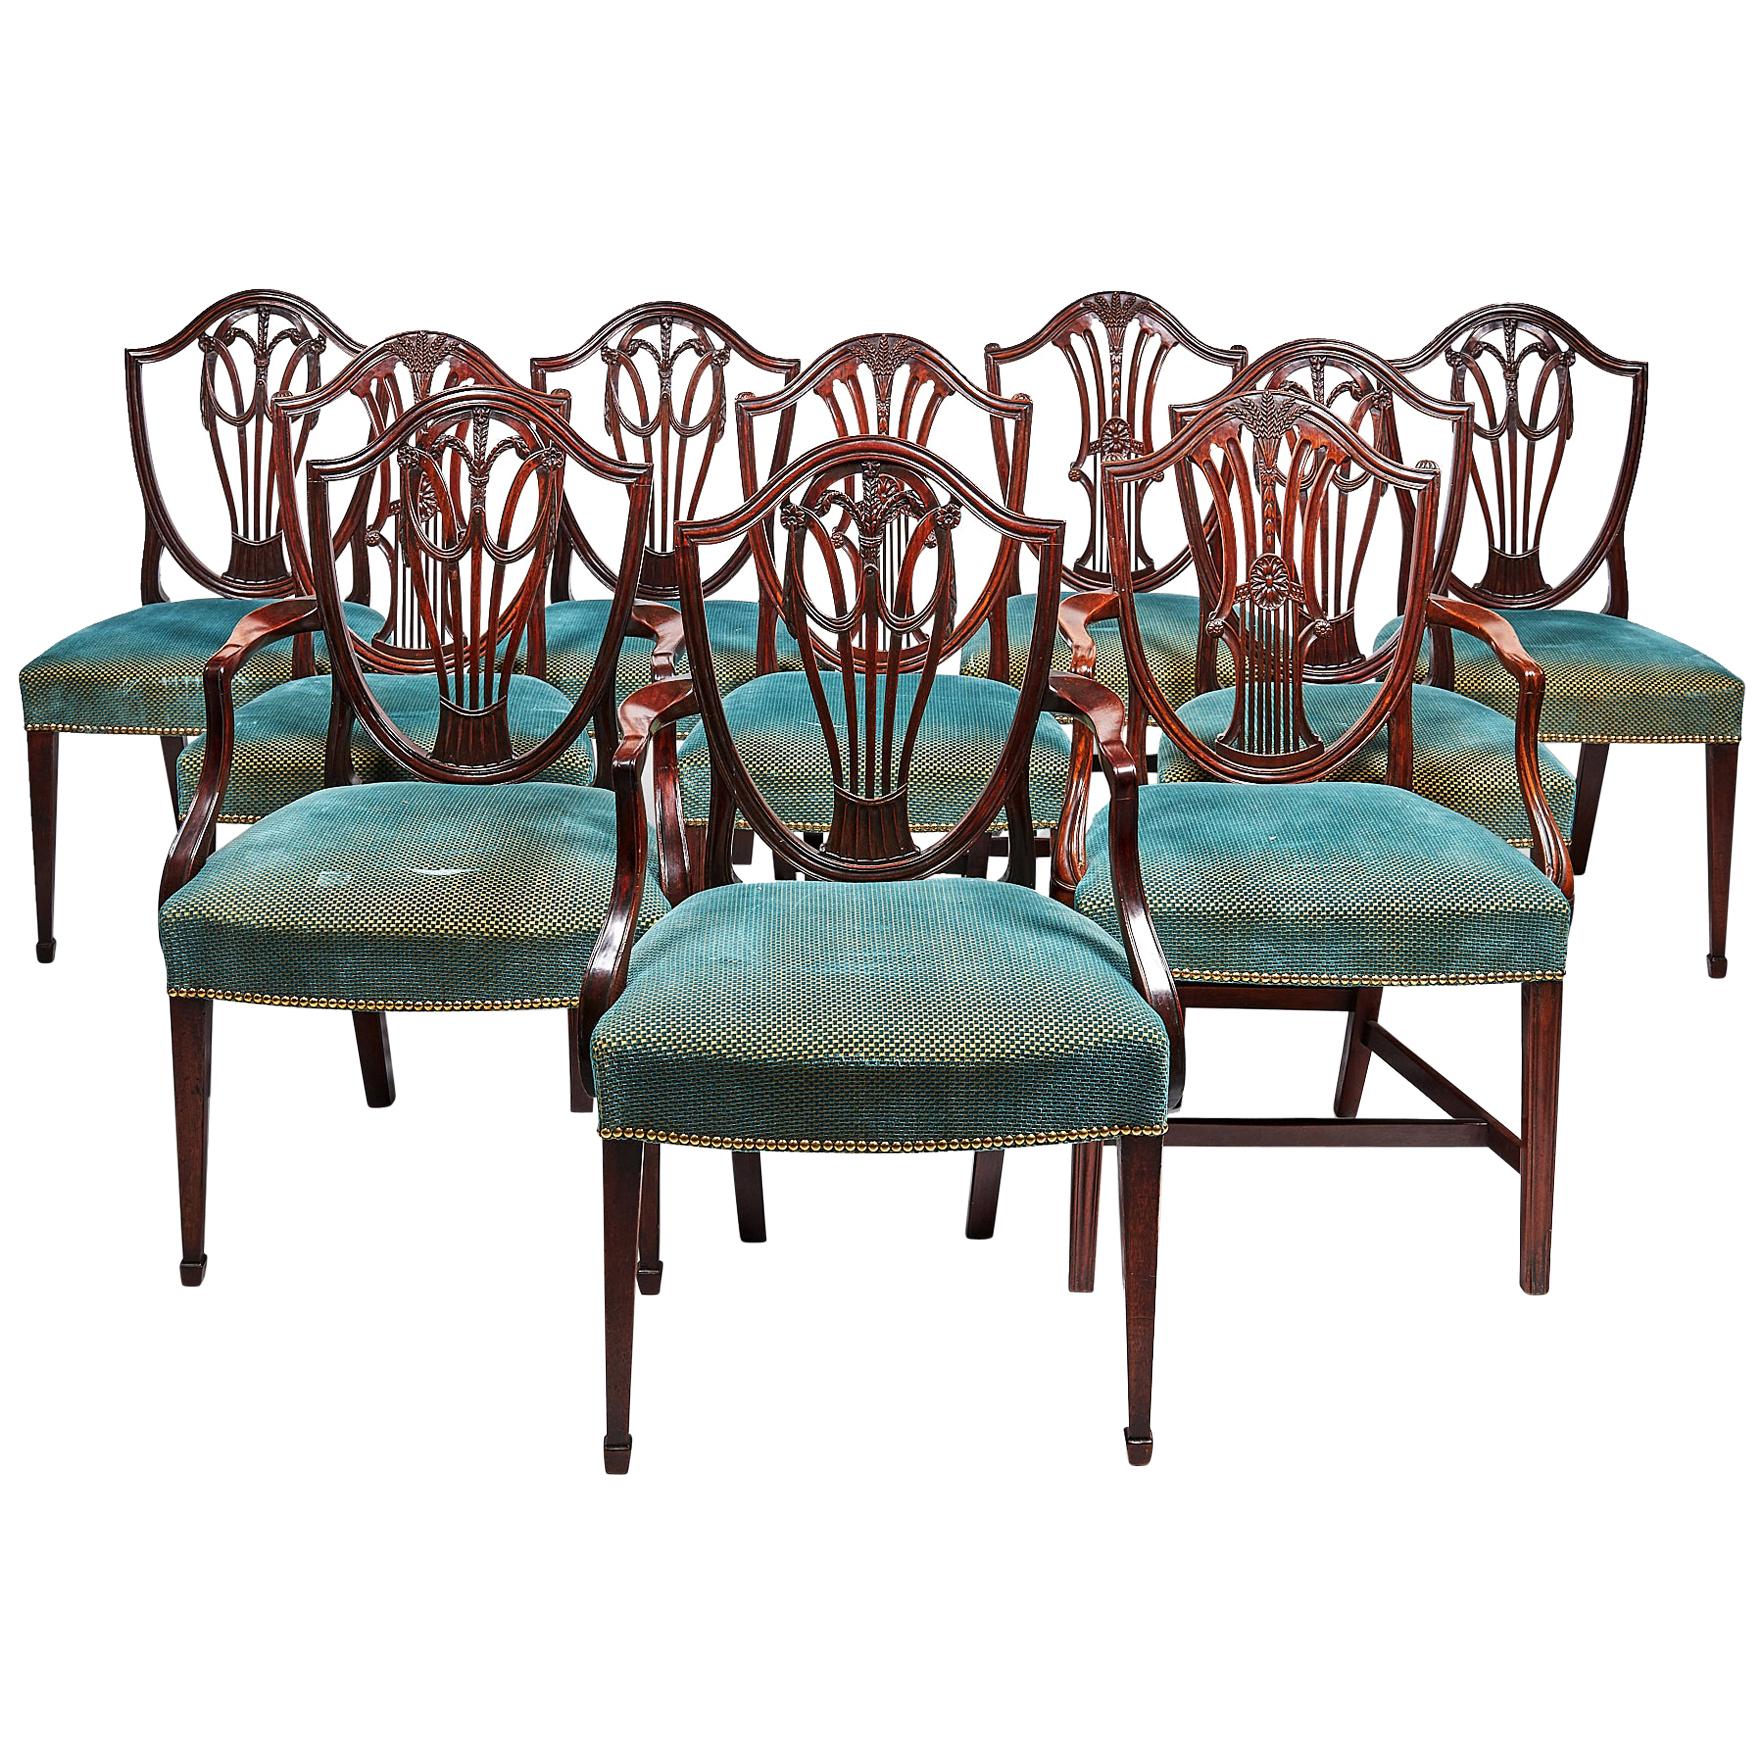 Ten George III Mahogany Dining Chairs in the Hepplewhite Style